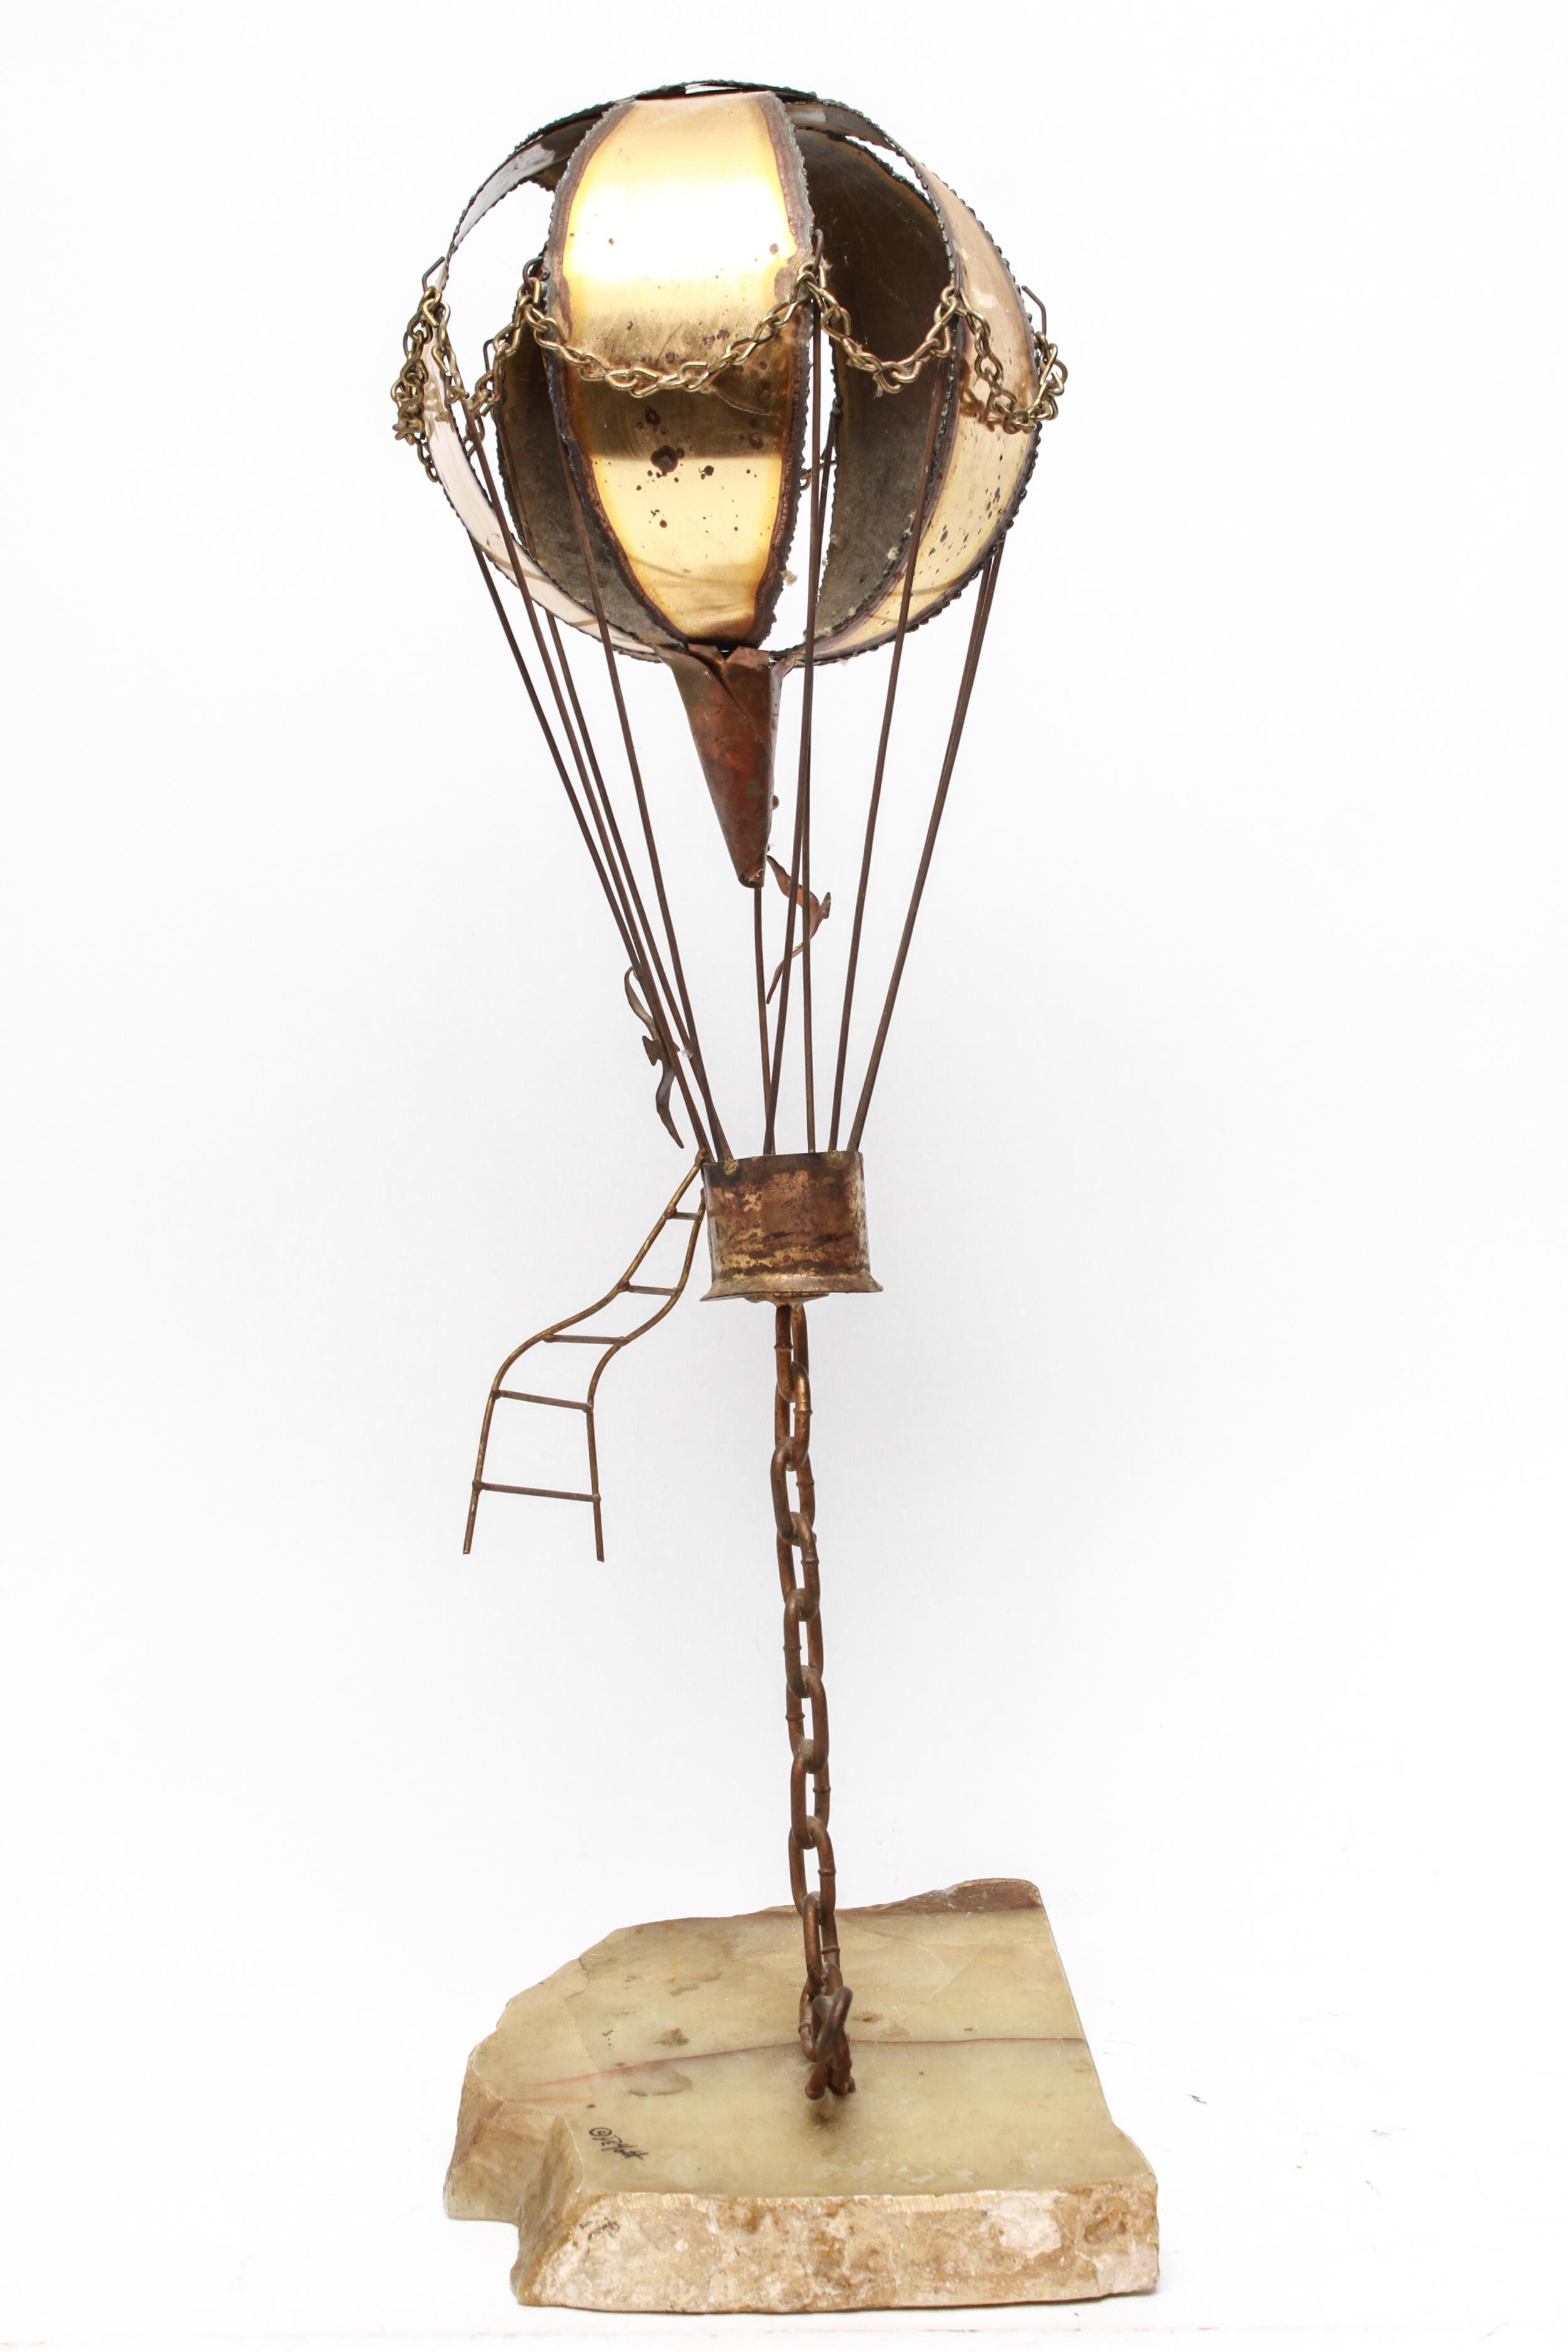 American Brutalist brass hot air balloon sculpture designed by John Demott (American, 20th century) during the 1970s, mounted on a slab of polished onyx and signed in one corner 